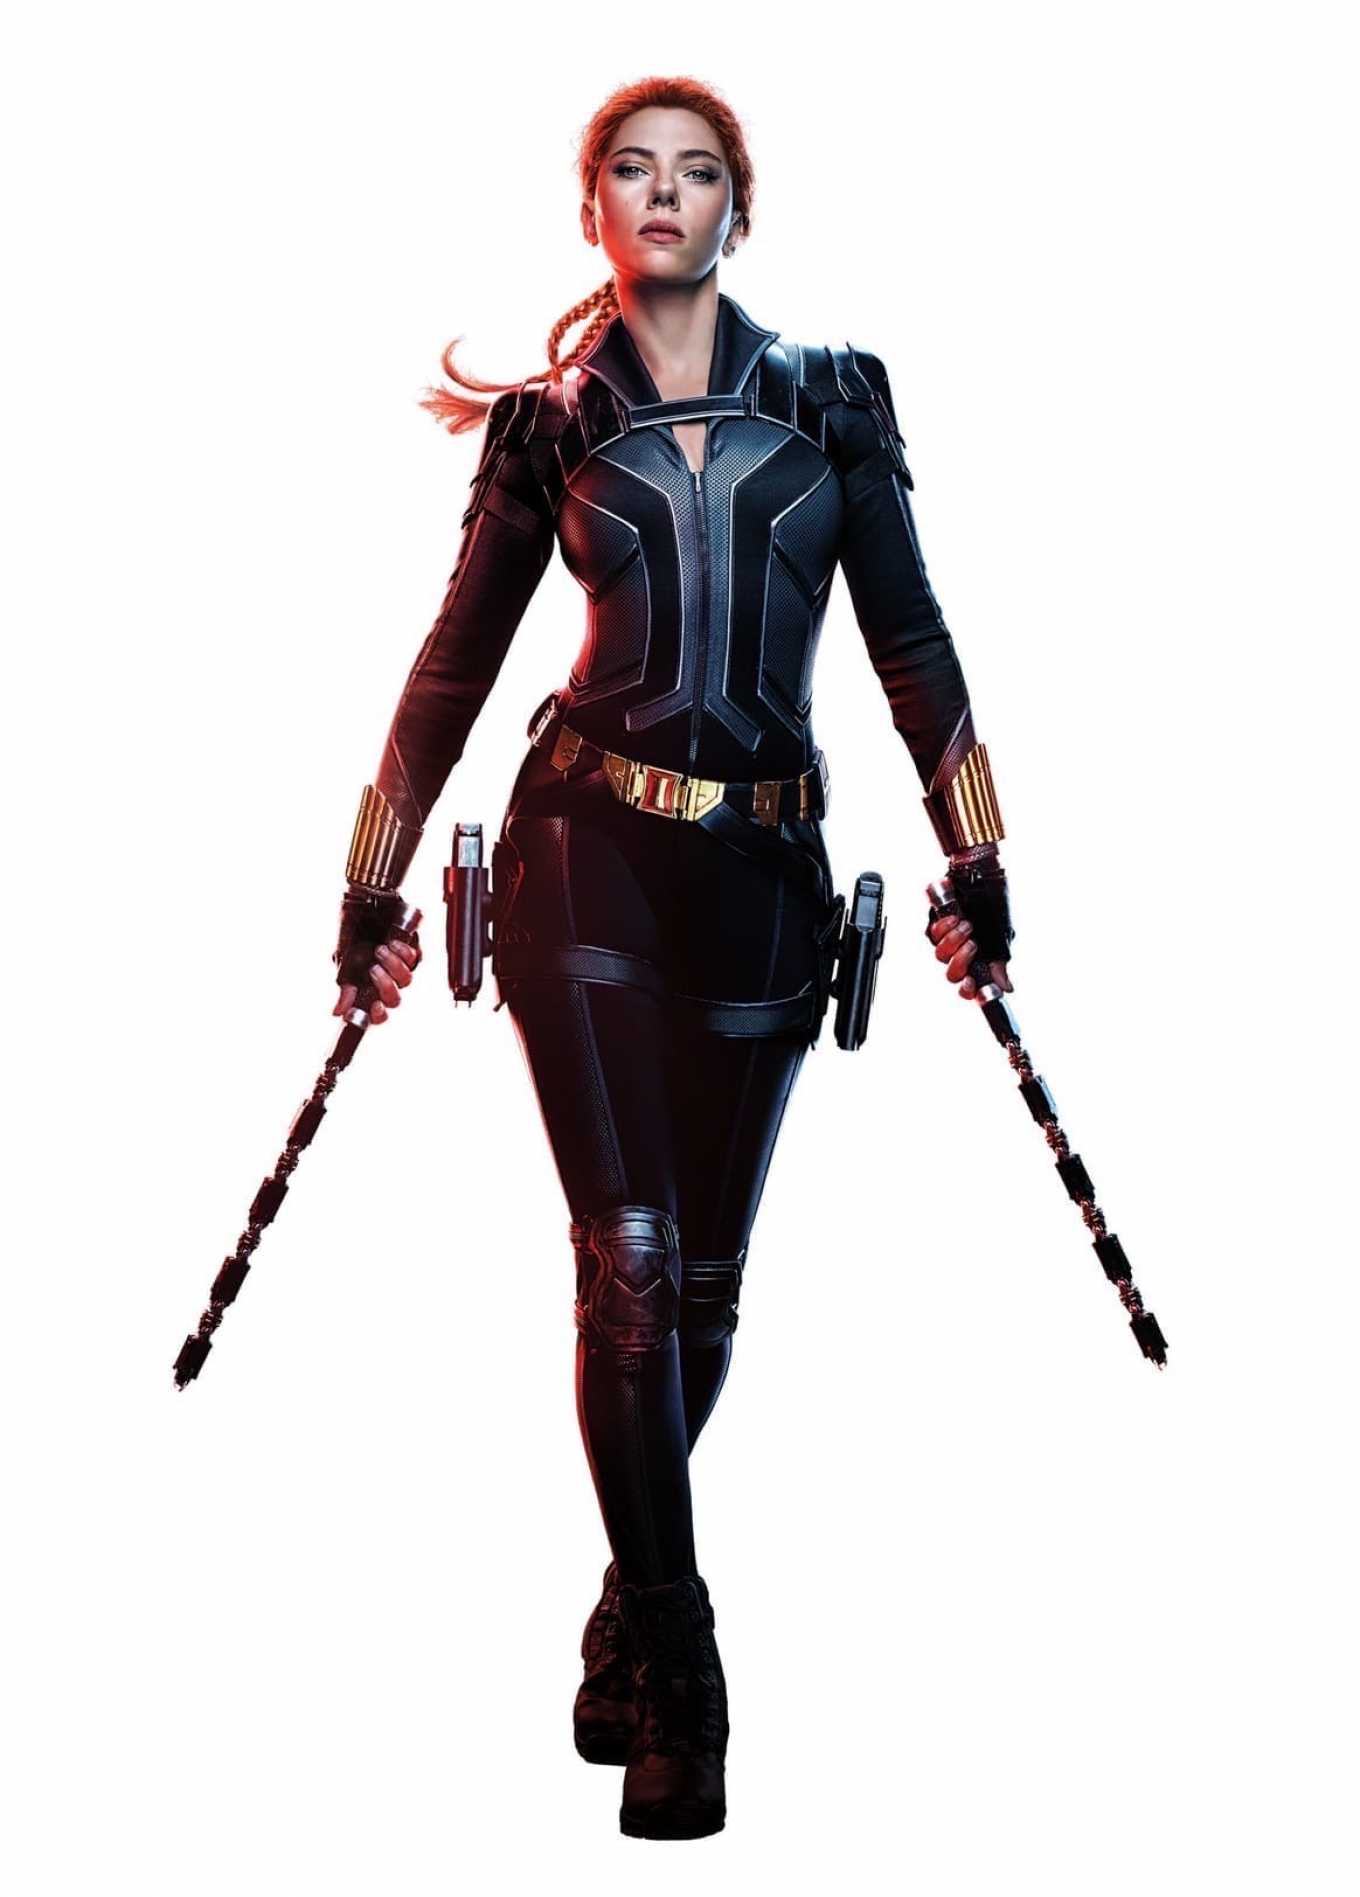 Scarlett Johansson - Black Widow Posters and Promotional Photos 2020